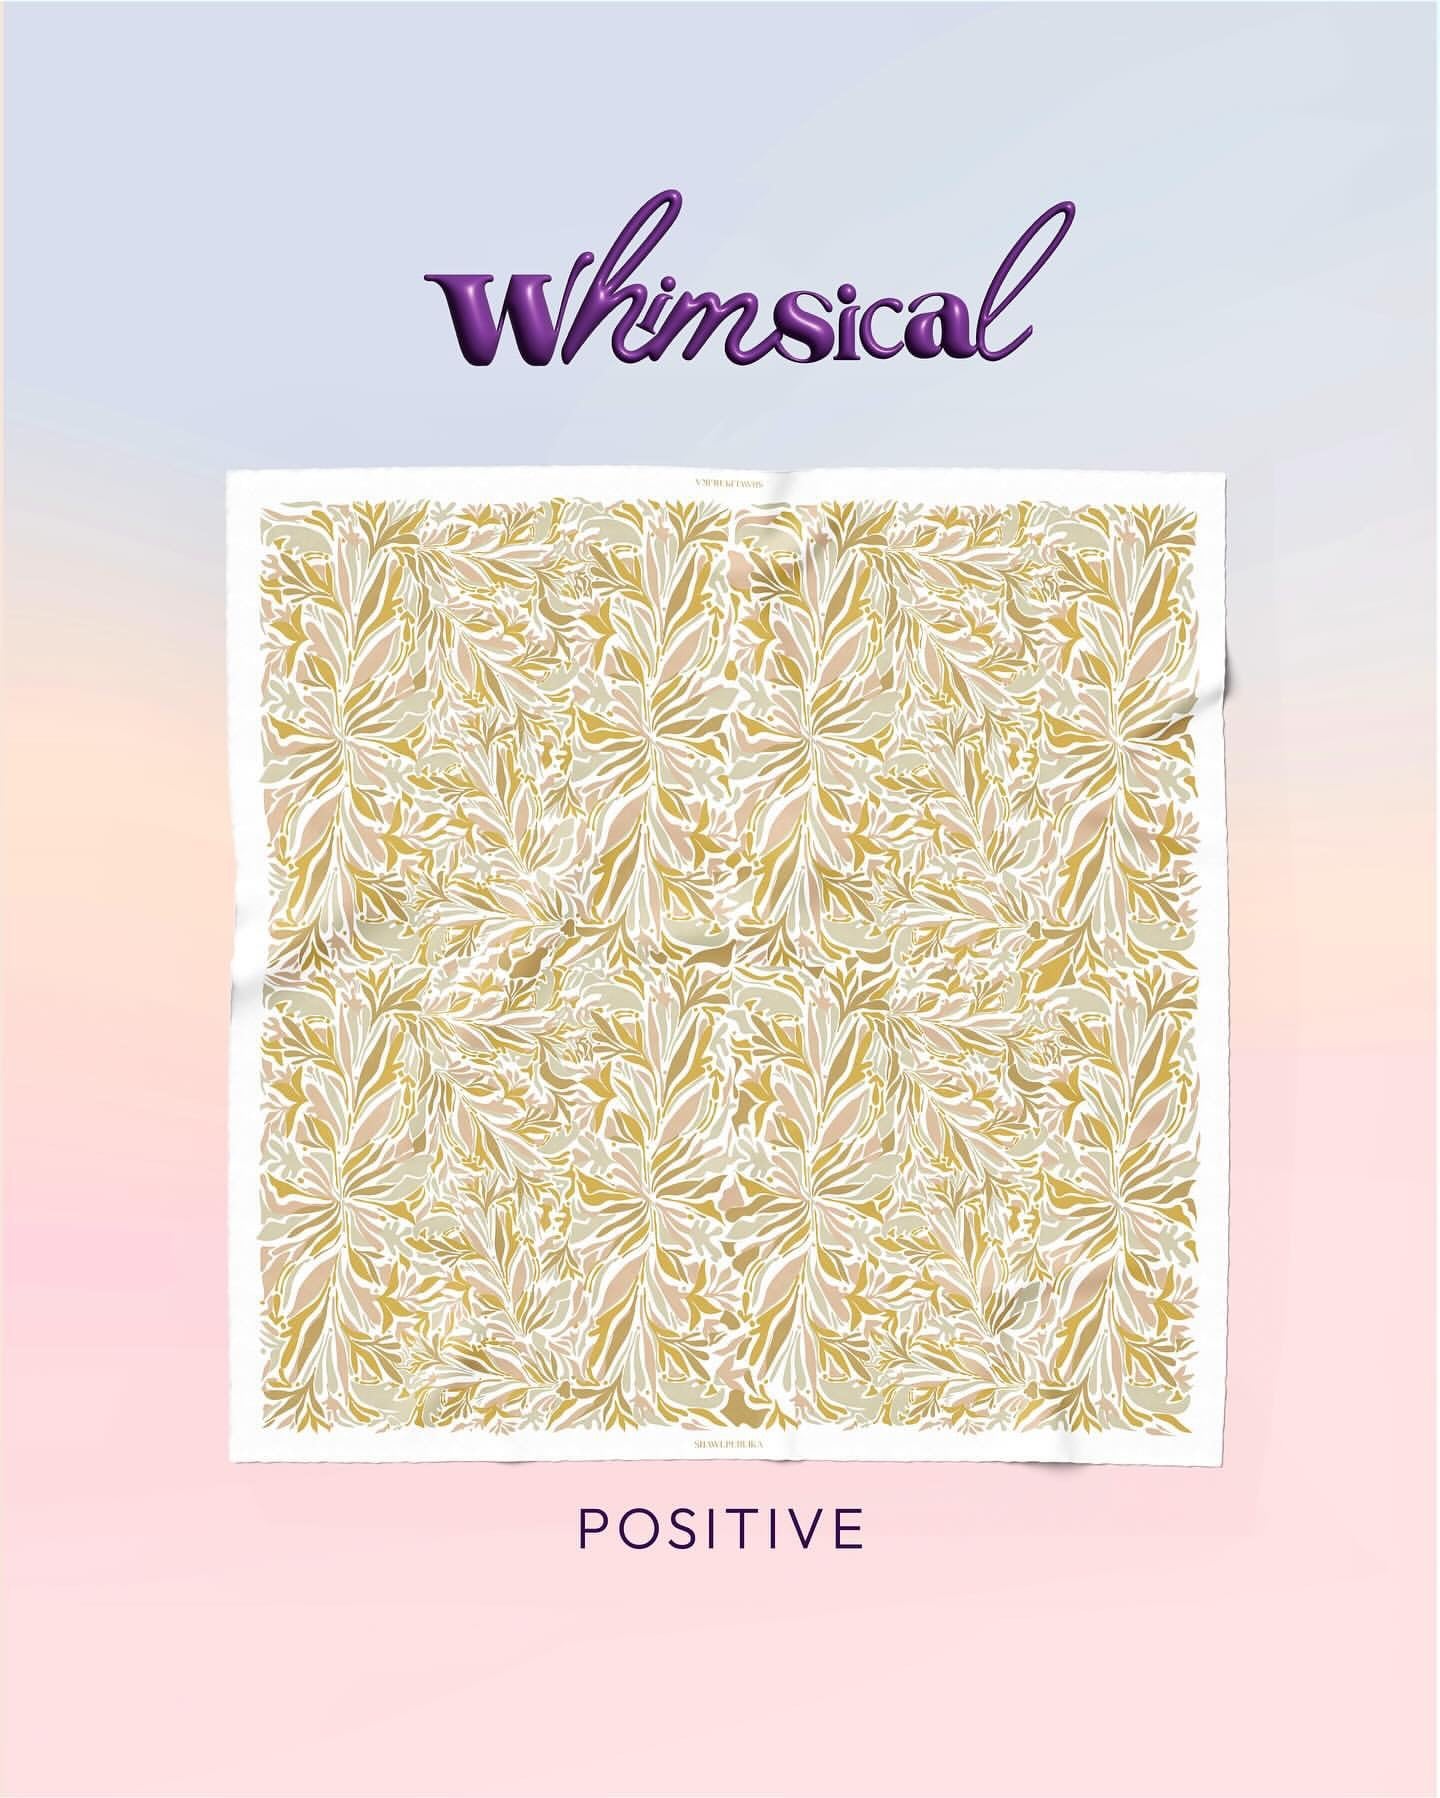 Whimsical in Positive